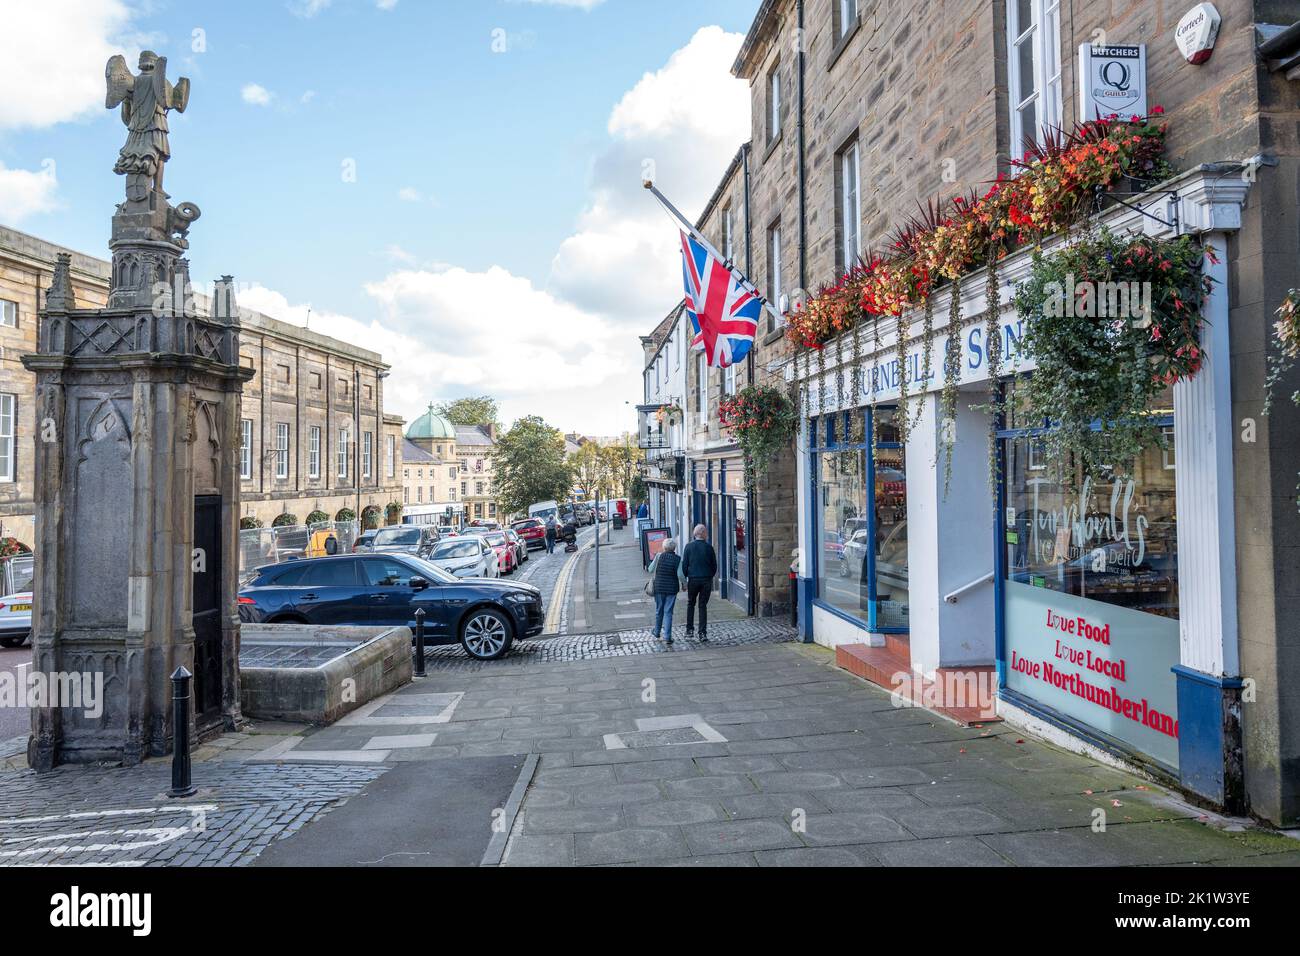 Bondgate within, the main shopping and business road in the centre of the market town of Alnwick, Northumberland, England, UK Stock Photo